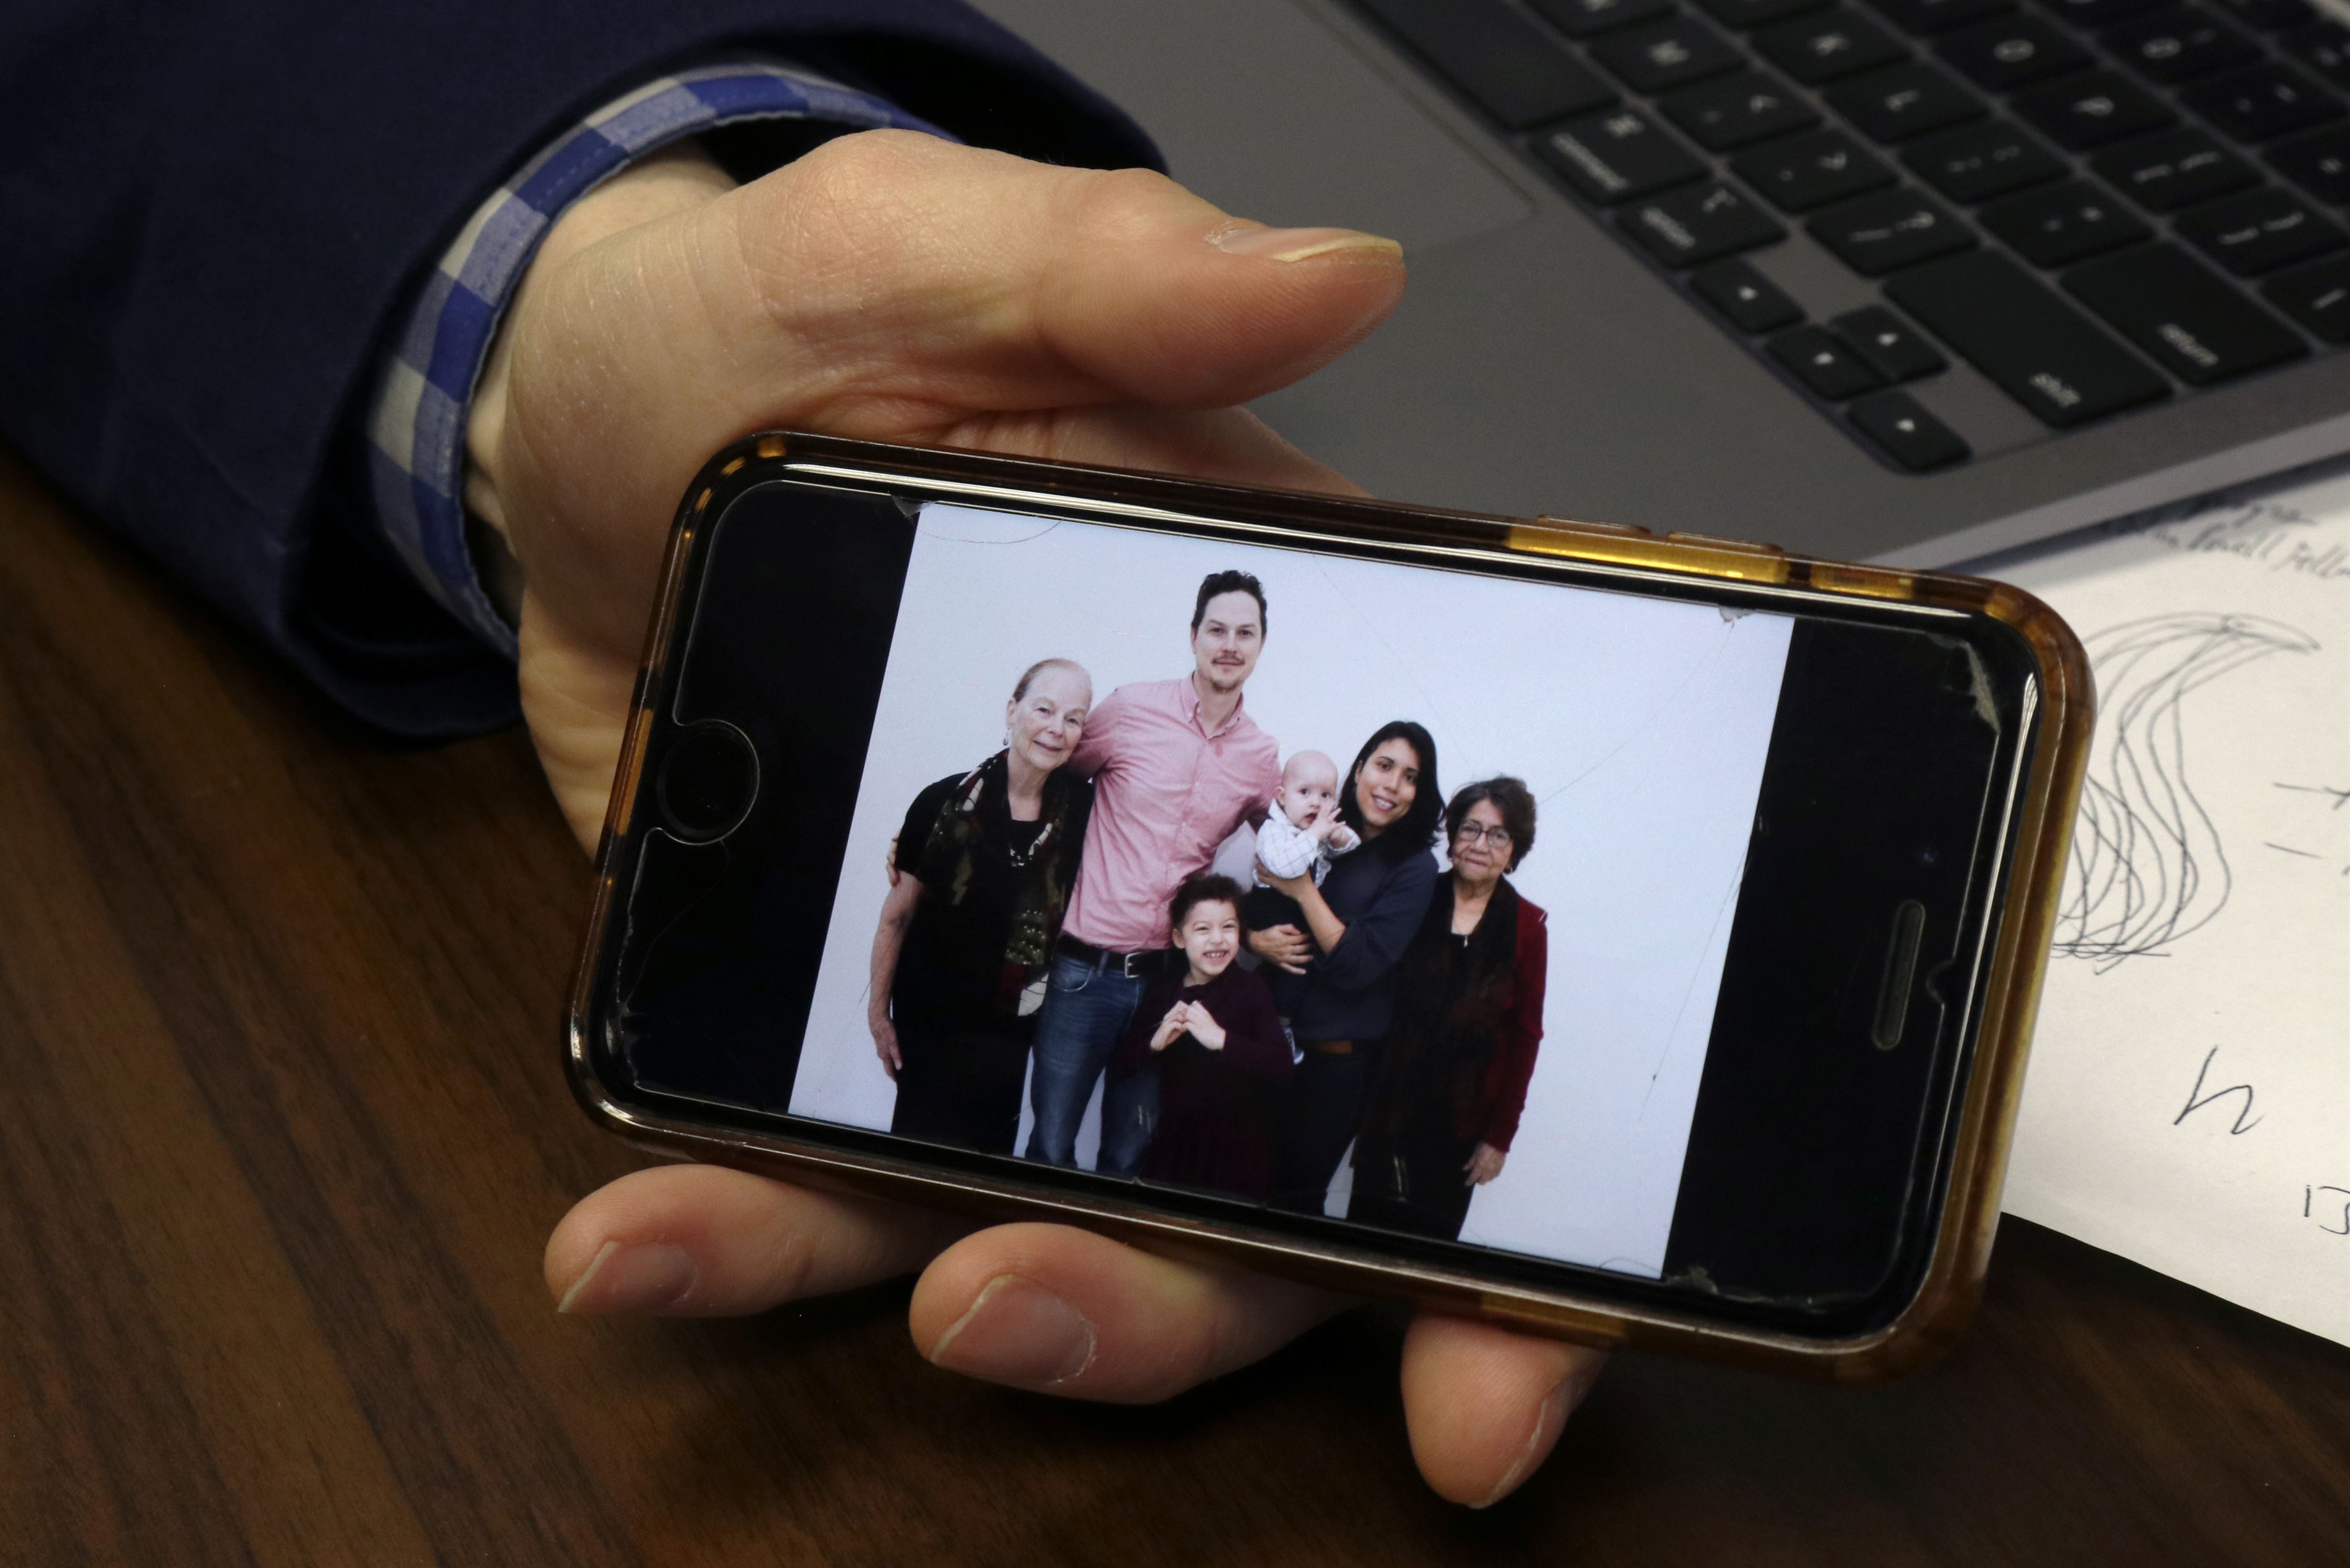 Associate professor of Latino sociology at Montclair State University, Stephen Ruszczyk, shows a picture of his family from his cell phone. Throughout the image, Ruszczyk introduced his children, who are half-Latino and half-white. President Joe Biden's proposal will help their children feel more comfortable in choosing the race they identify with in the future. Darian Mozo | The Montclarion